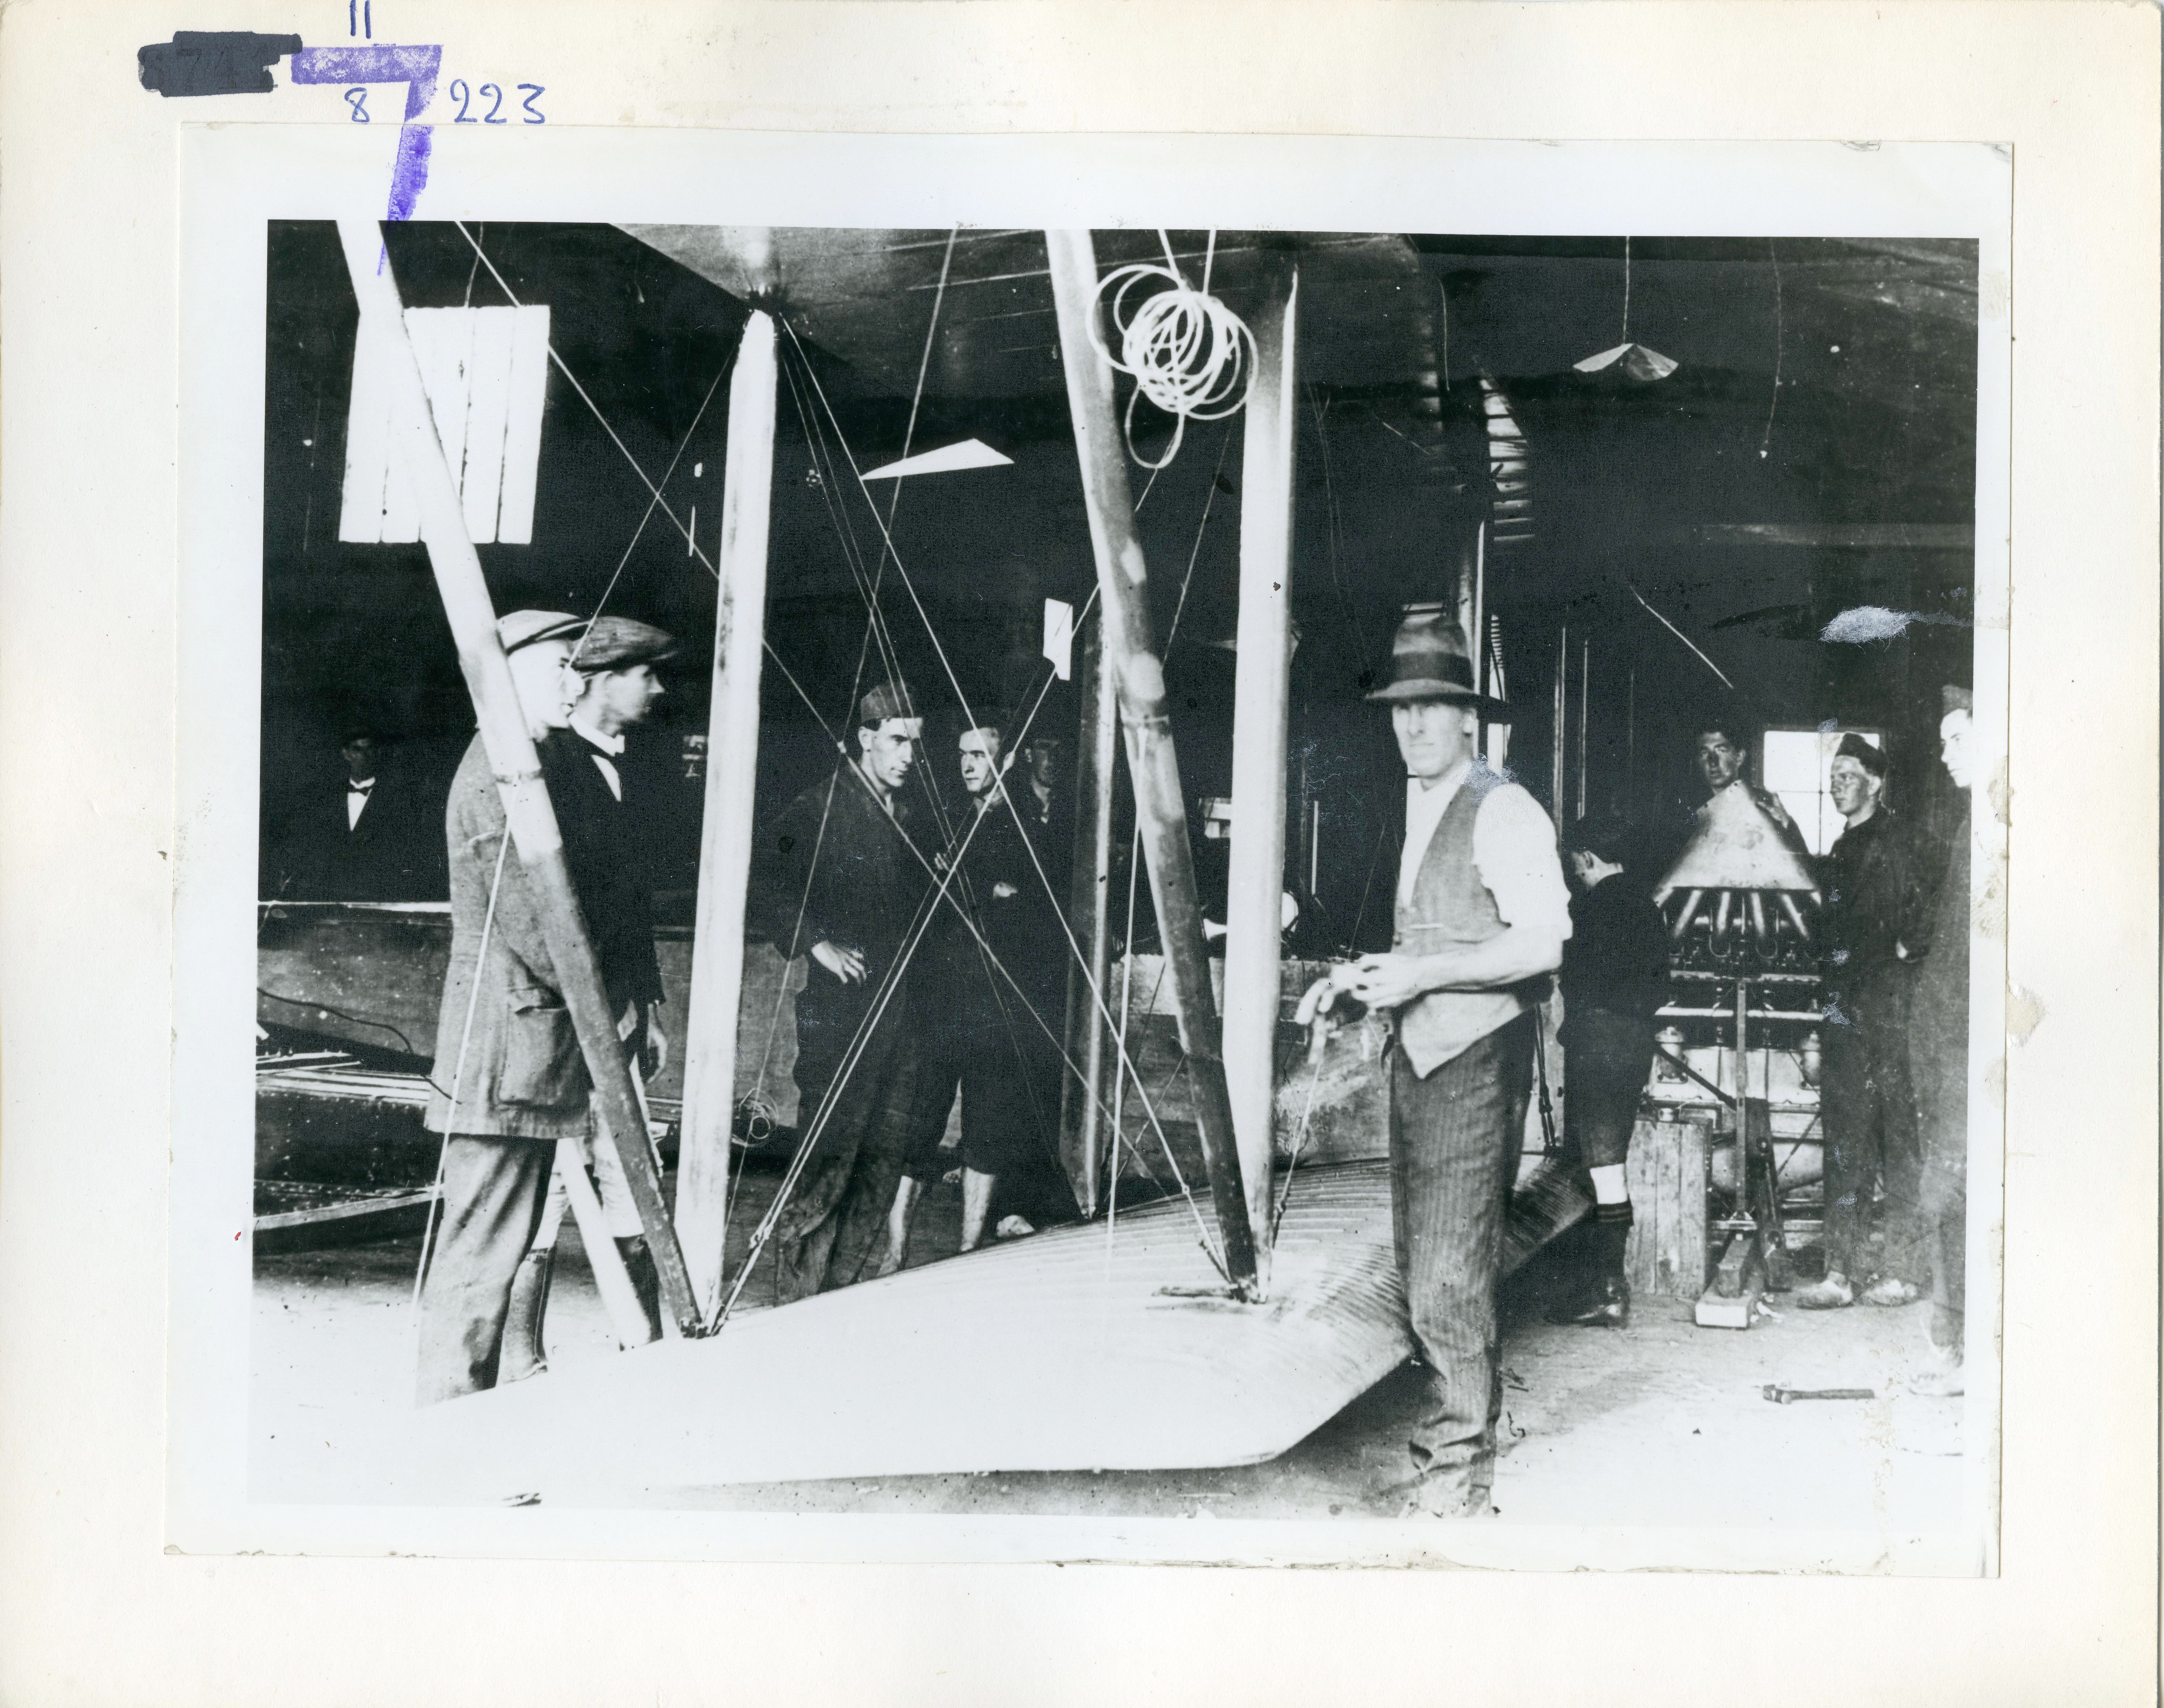 The Walsh brothers constructing an aircraft